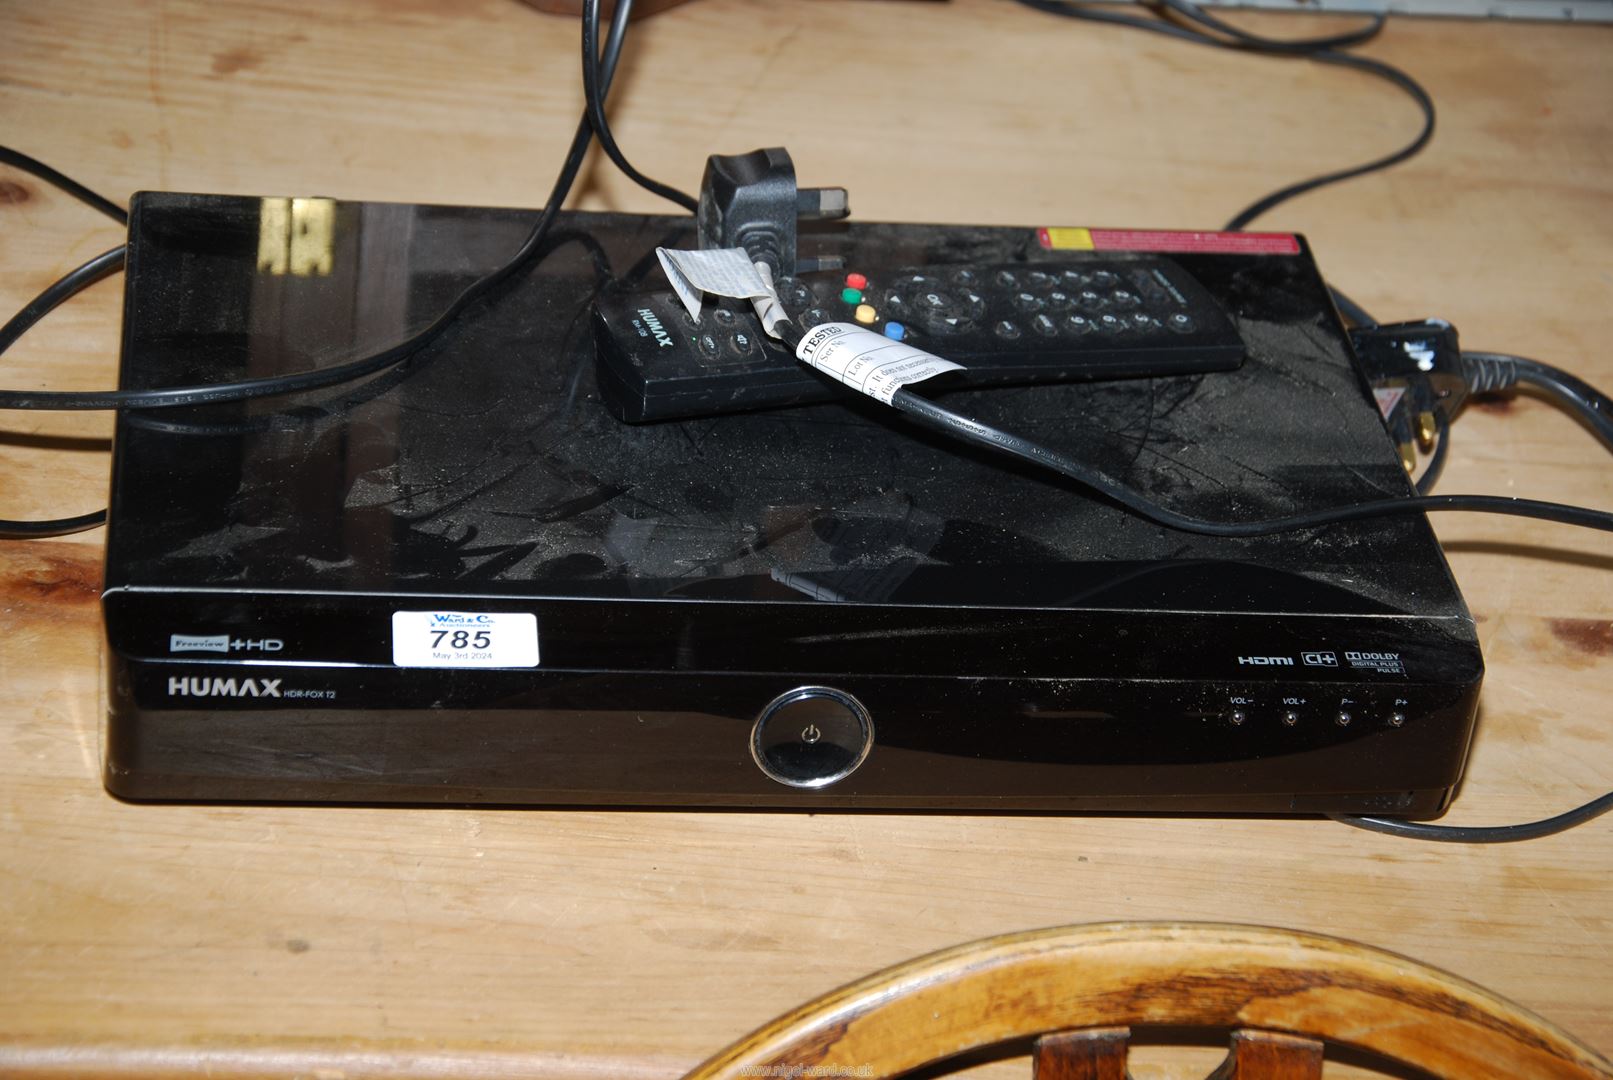 A Humax freeview and HD box.